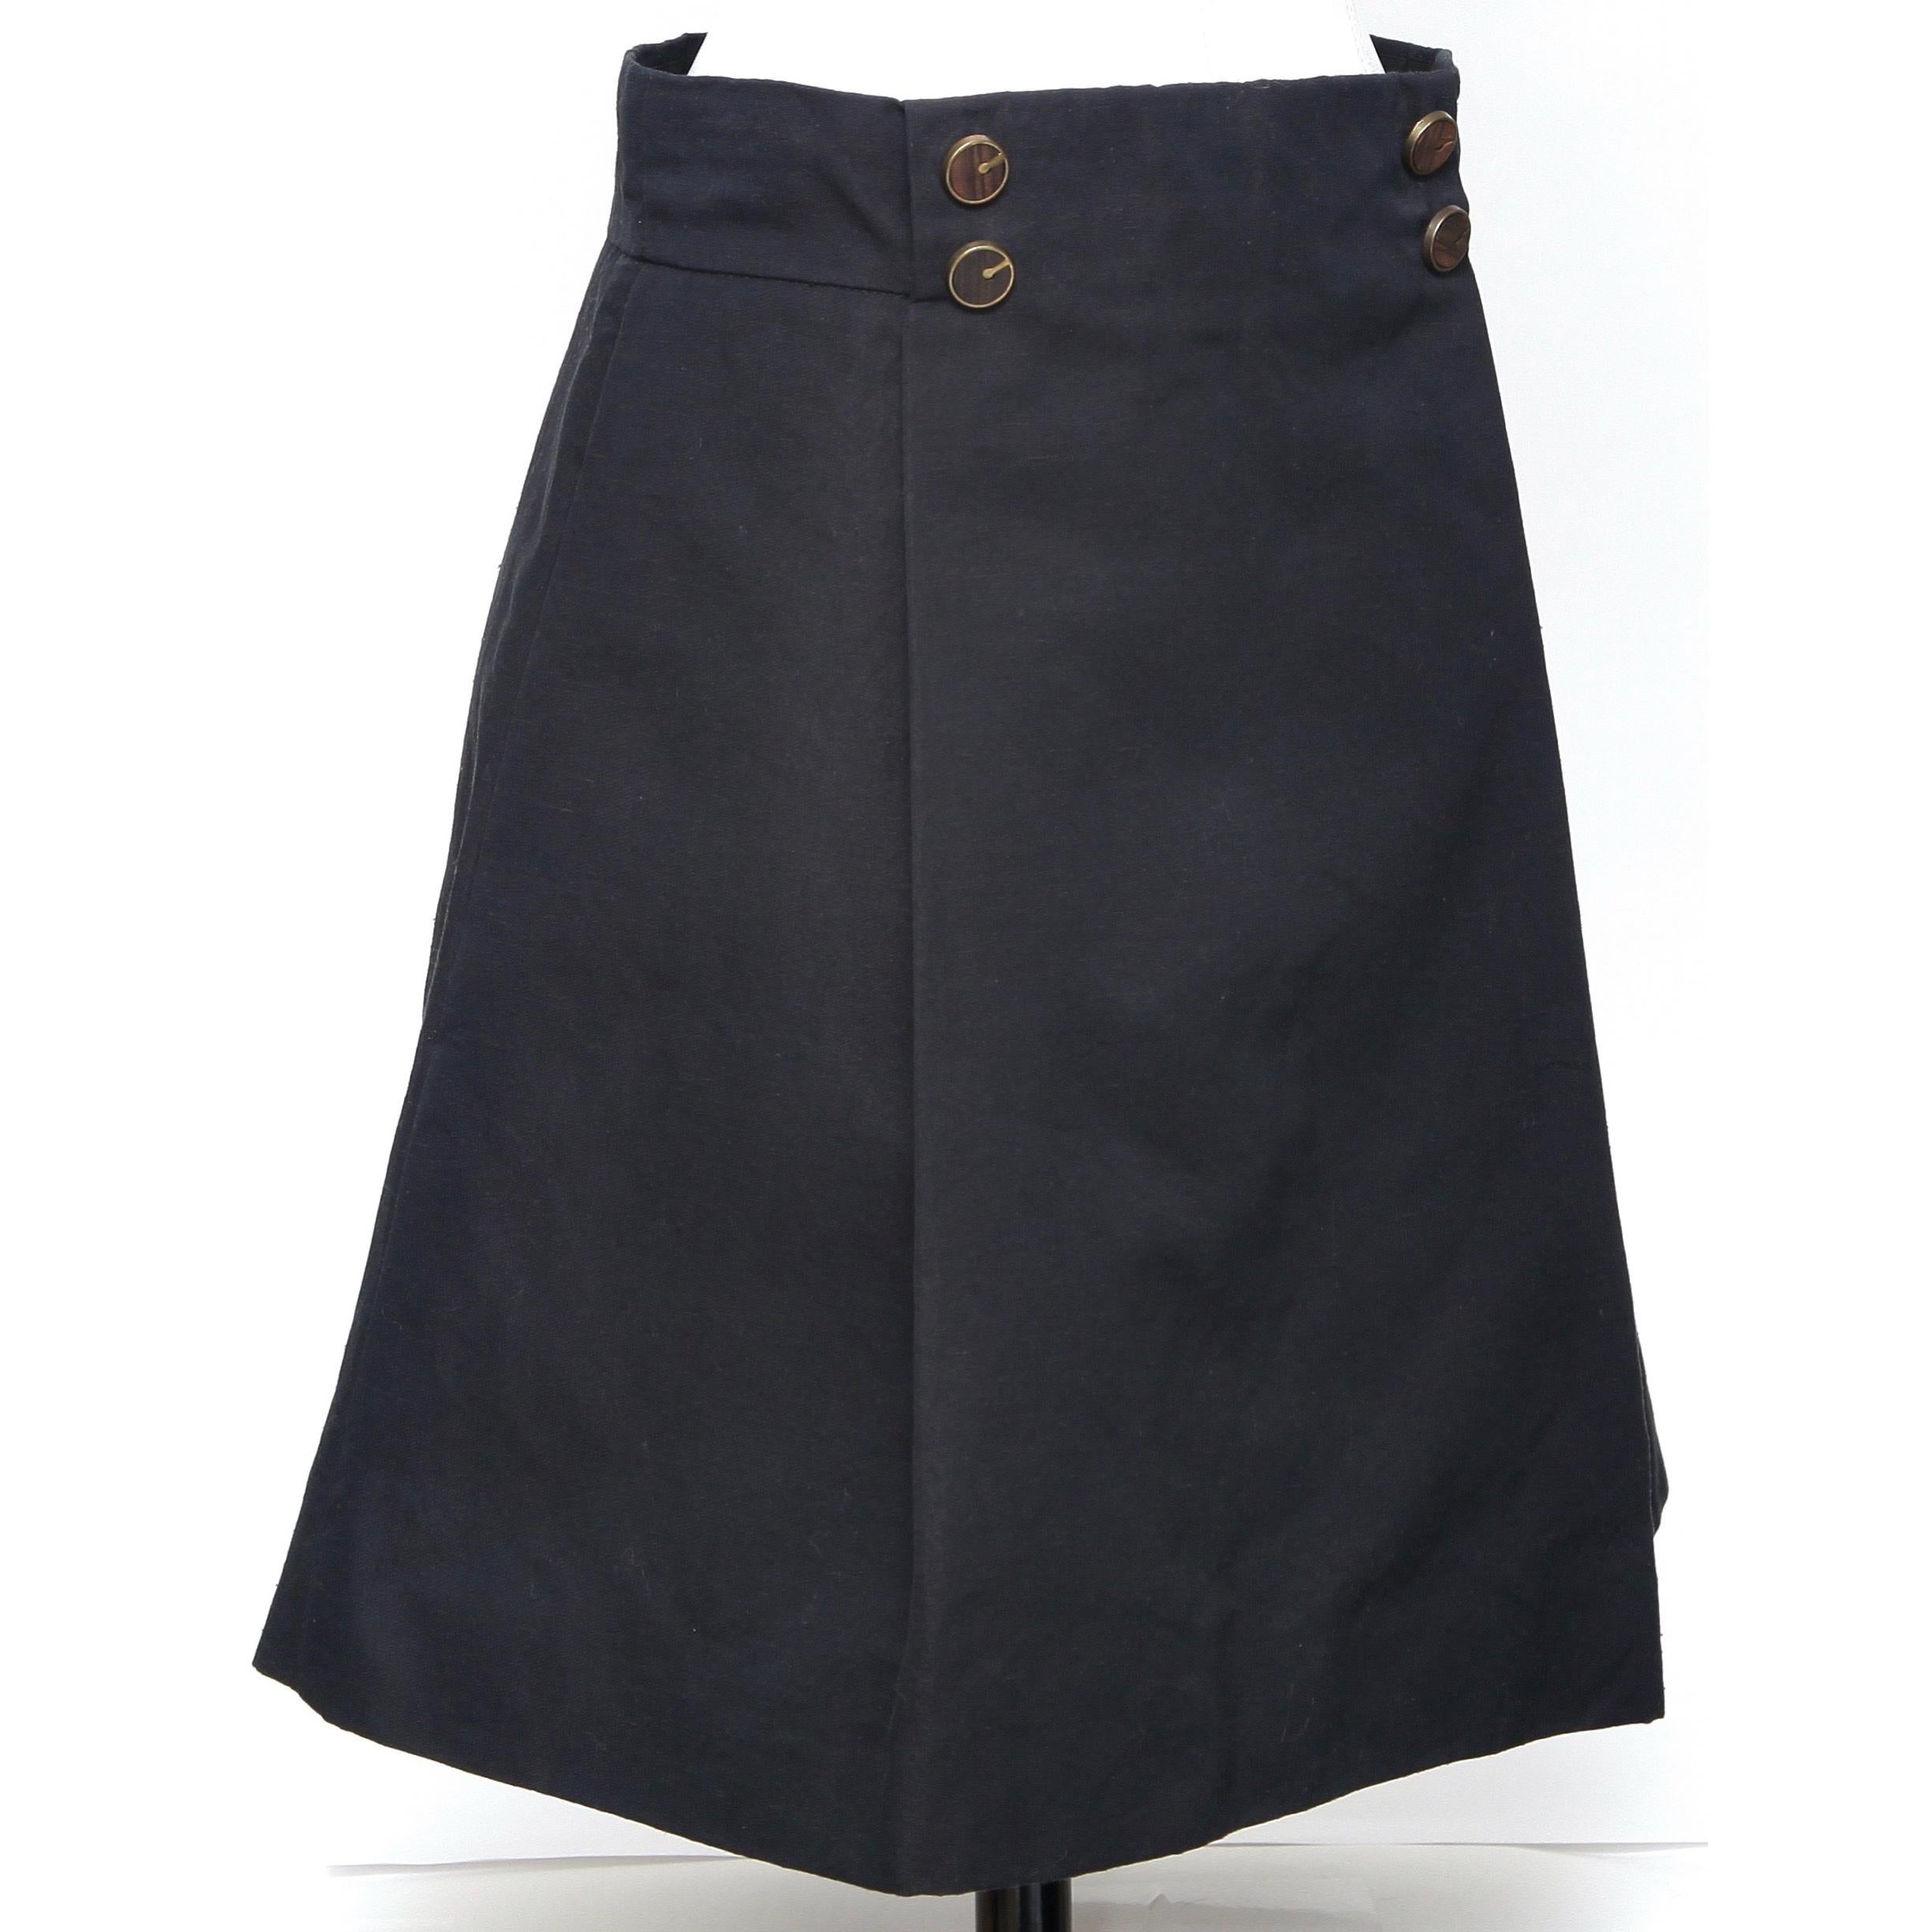 GUARANTEED AUTHENTIC CHLOE BLACK COTTON BLEND PLEATED SKIRT

Design:
- Large pleated front with non-working buttons.
- Side pockets.
- Rear zipper and dual hook-n-eye closure.
- Fully lined.

Size: 42

Fabric: 58% Cotton, 42% Polyester

Measurements